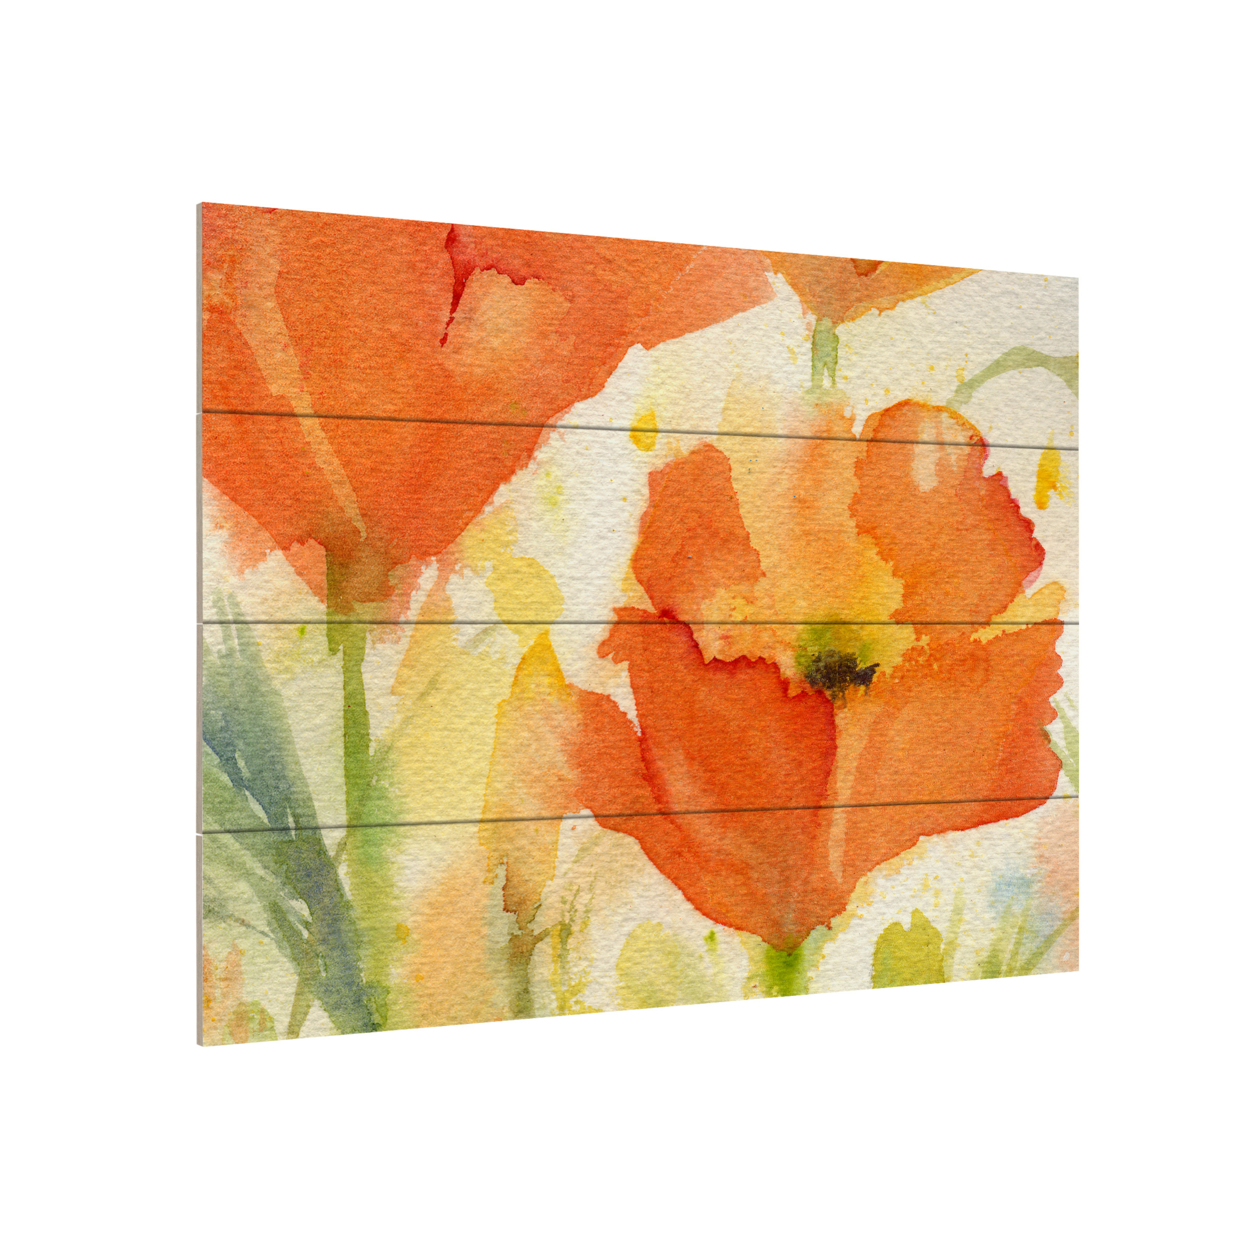 Wall Art 12 X 16 Inches Titled Field Of Poppies Golden Ready To Hang Printed On Wooden Planks